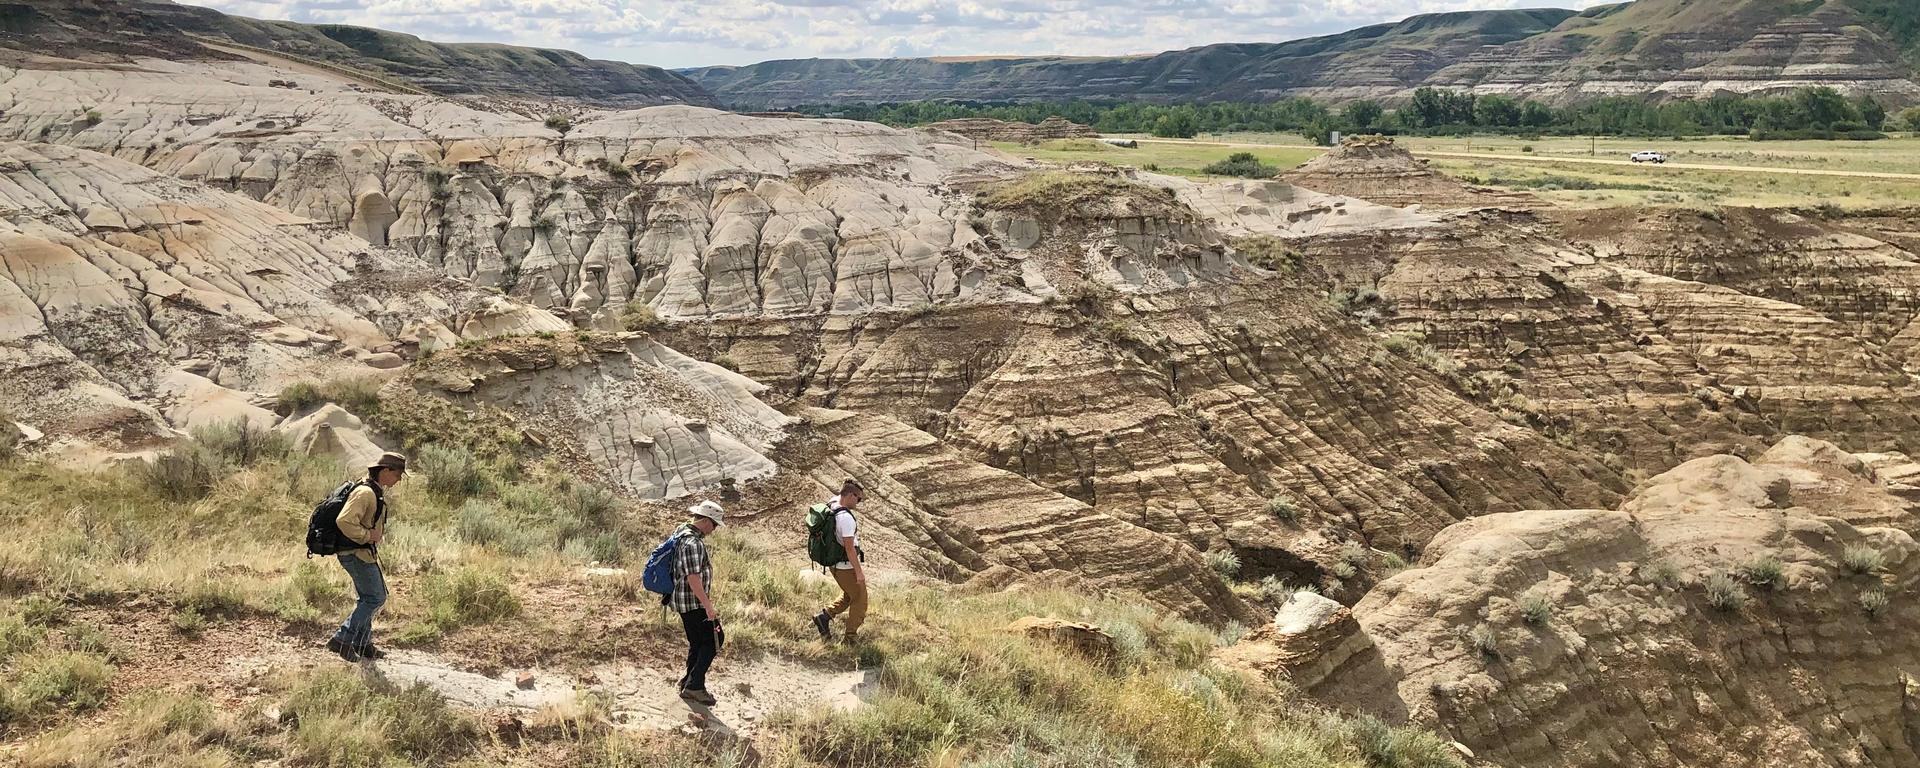 Members of the field team explore the geology at the Drumheller field site, including project investigators Dr. Glen Dolphin (left) and Dr. Paul Nesbit (right), as well as Associate Professor (teaching) Dr. Alex Dutchak (centre) from the Department of Geoscience